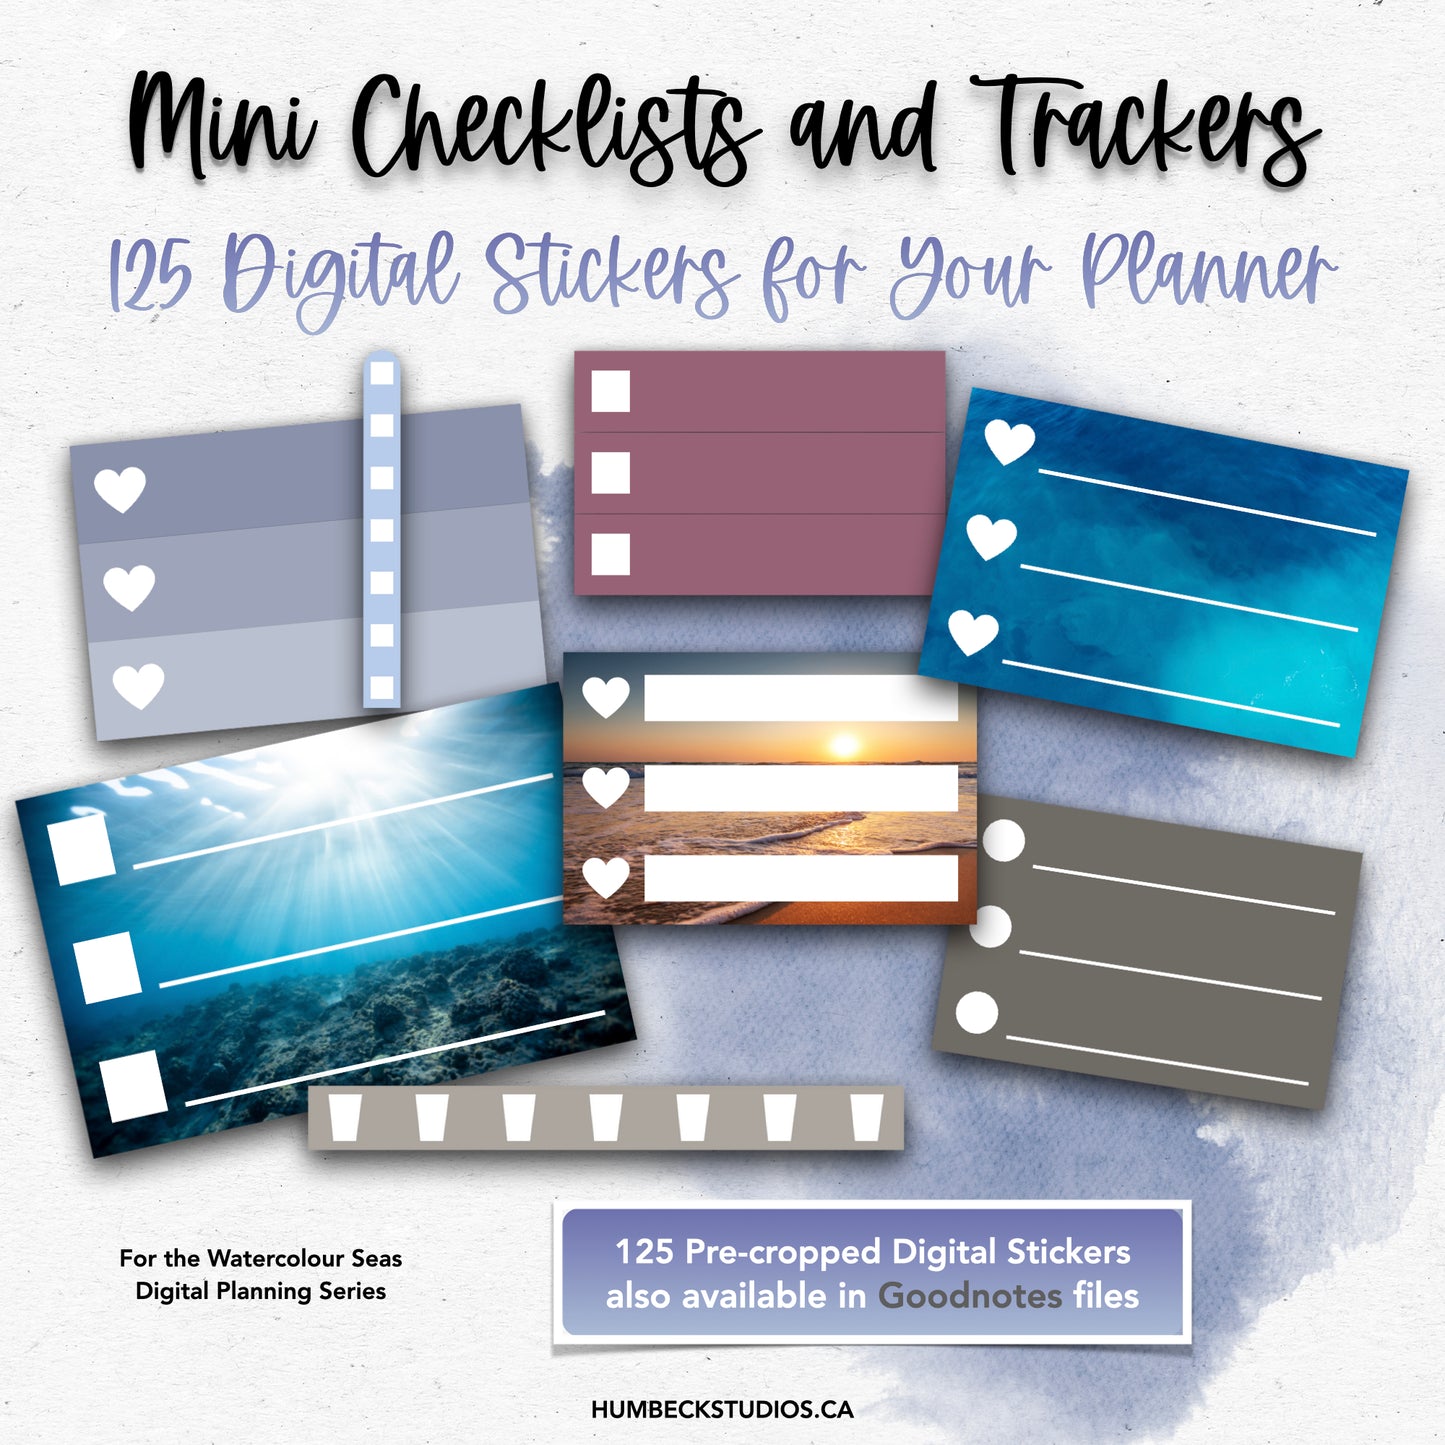 Digital Mini Checklists and Trackers - Watercolour Seas Collection